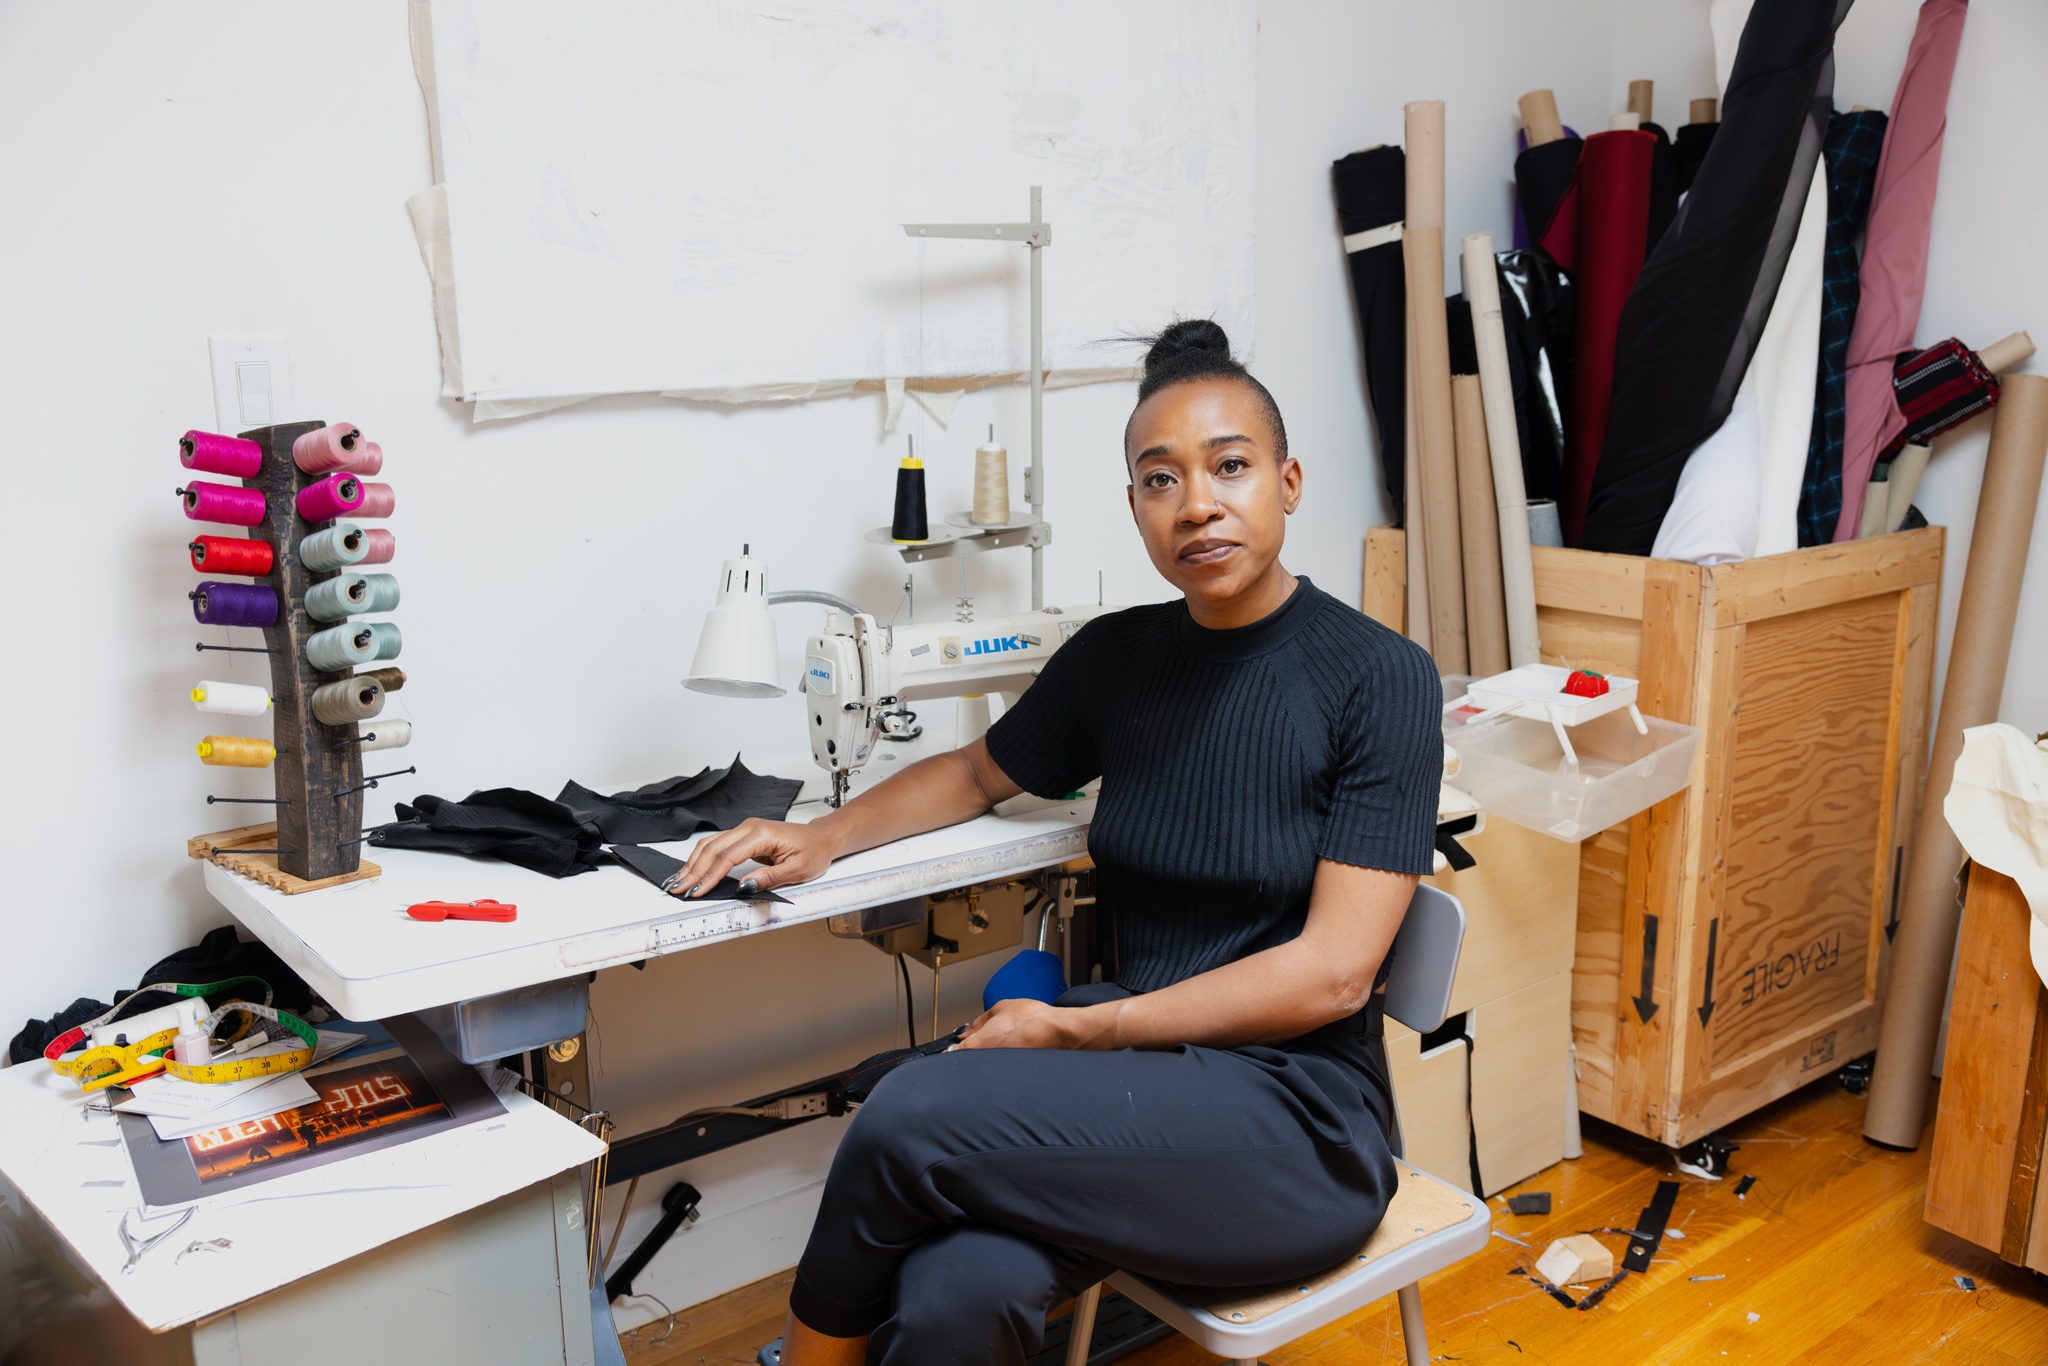 Artist Calli Roche, a Black person with hair pulled back in a tight bun, sits at a sewing table in their art studio. They are turned out to look directly at us and appear relaxed with one arm on the table. Around them is a sewing machine, textiles on tubes leaning in a corner, and skeins of pink thread on a carousel.